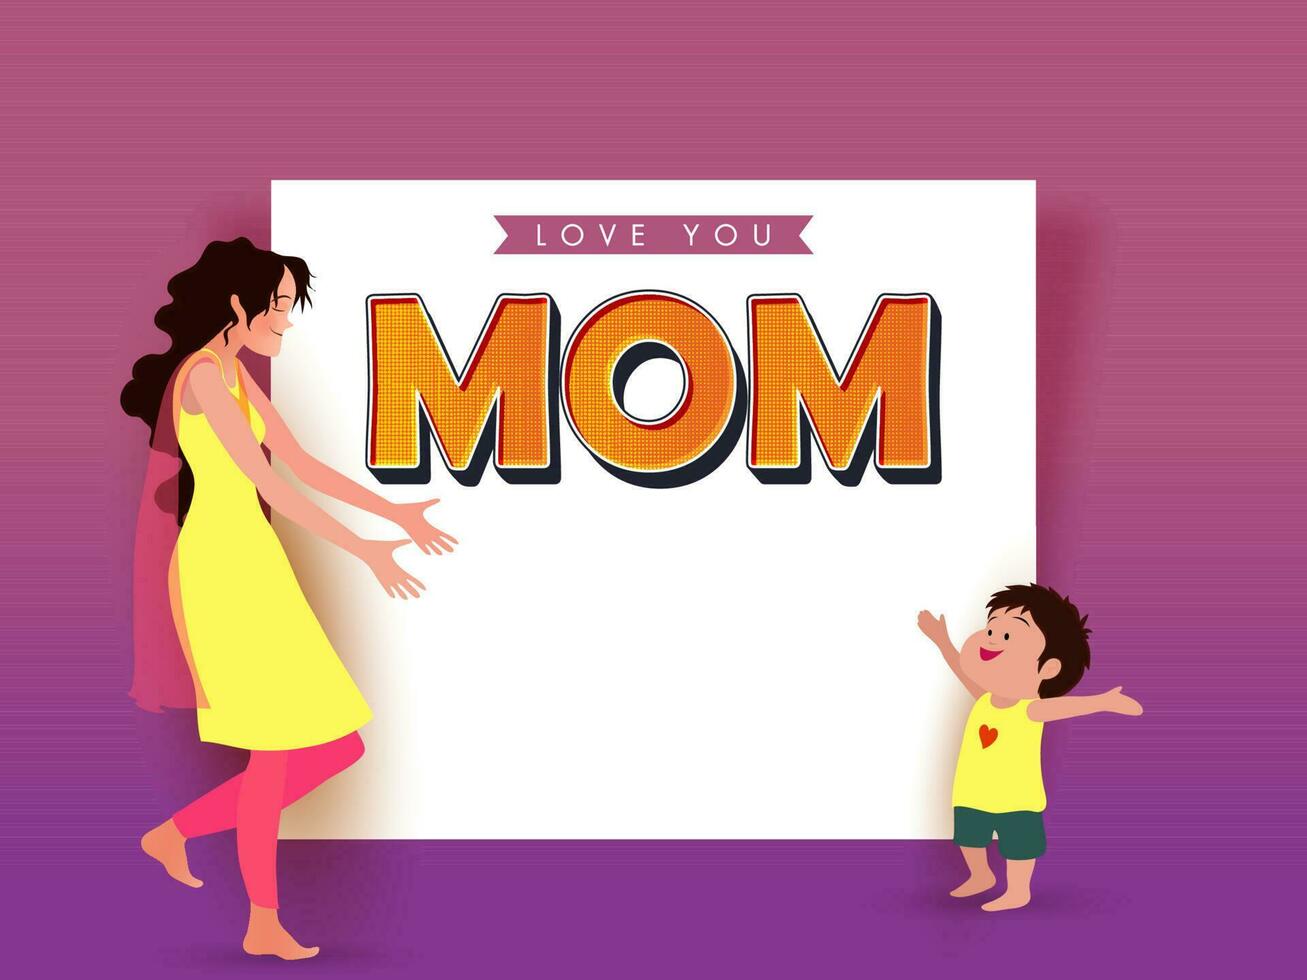 Love You Mom Font Over White Paper With Young Lady Saying Come Here My Son On Pink And Purple Background. vector